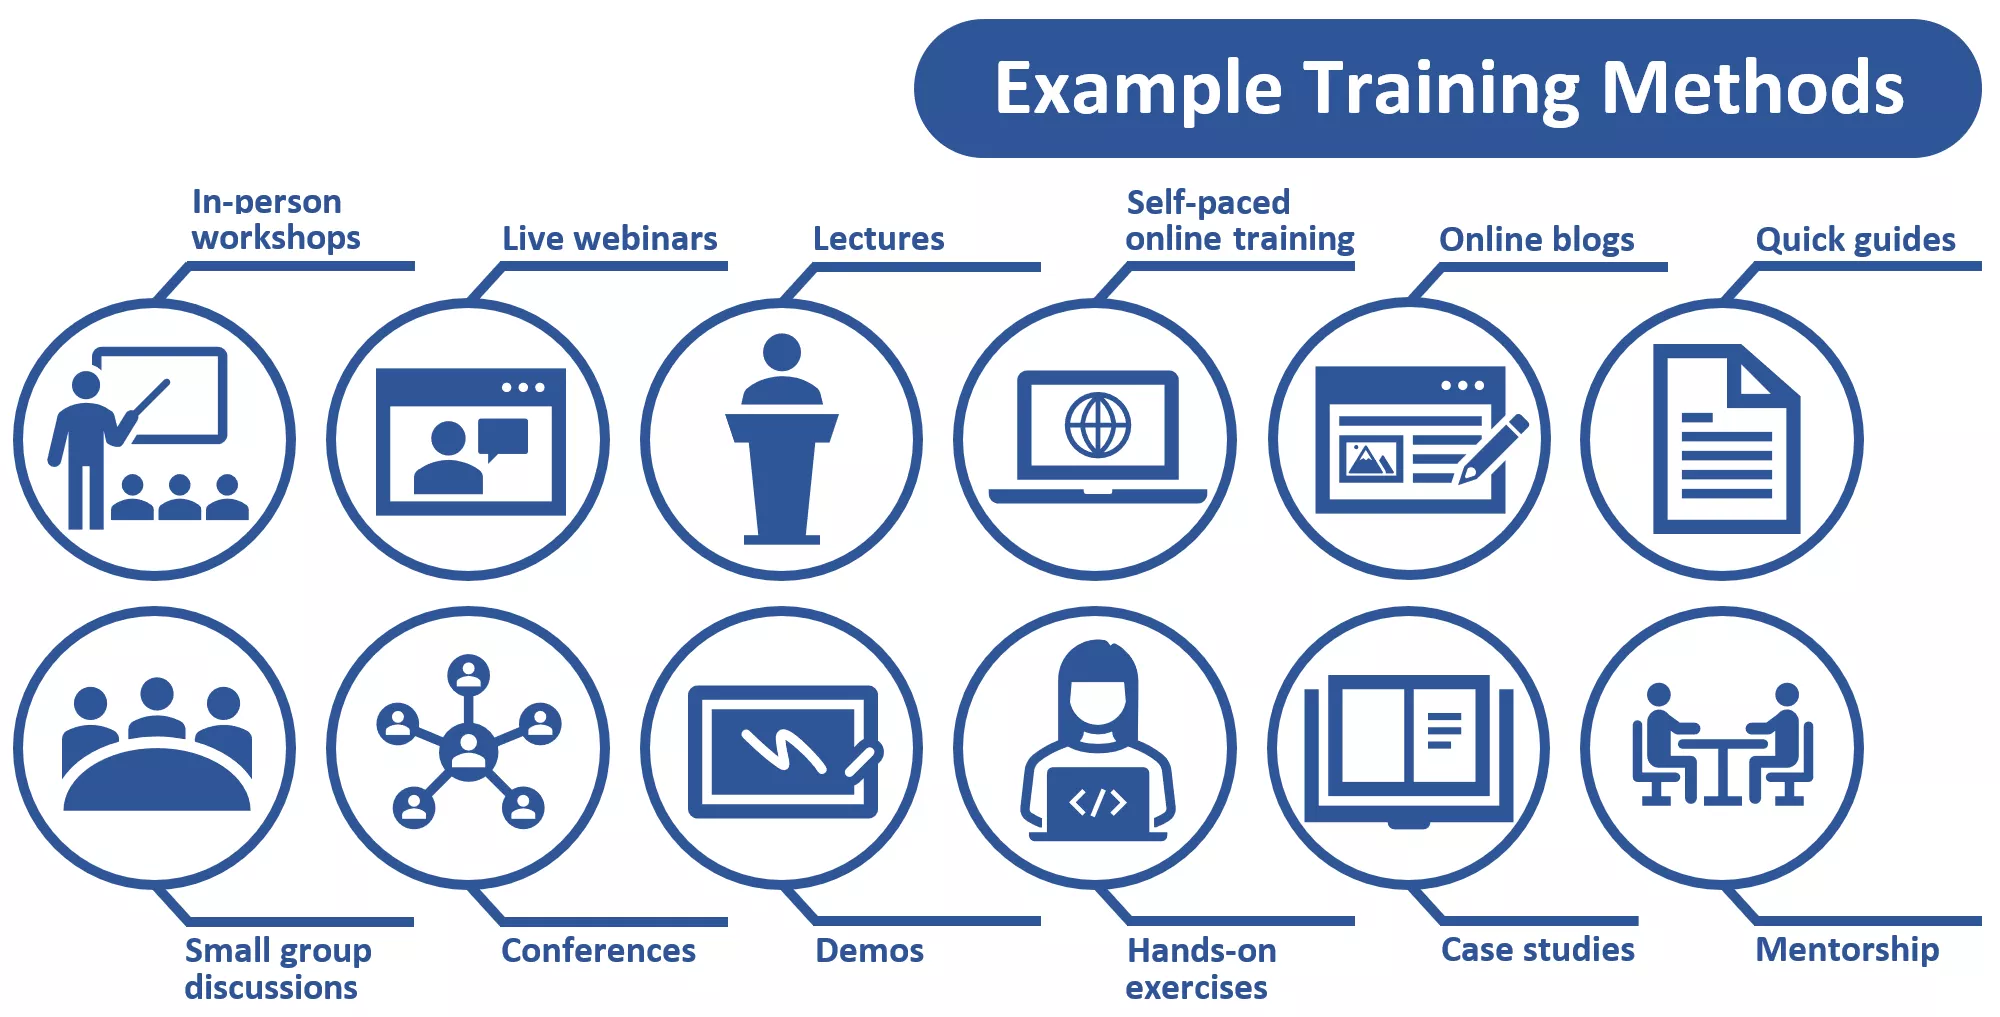 An illustration of twelve circled icons depicting example training methods, including in-person workshops, live webinars, lectures, self-paced online training, online blogs, quick guides, small group discussions, conferences, demos, hands-on exercises, case studies, and mentorship. 